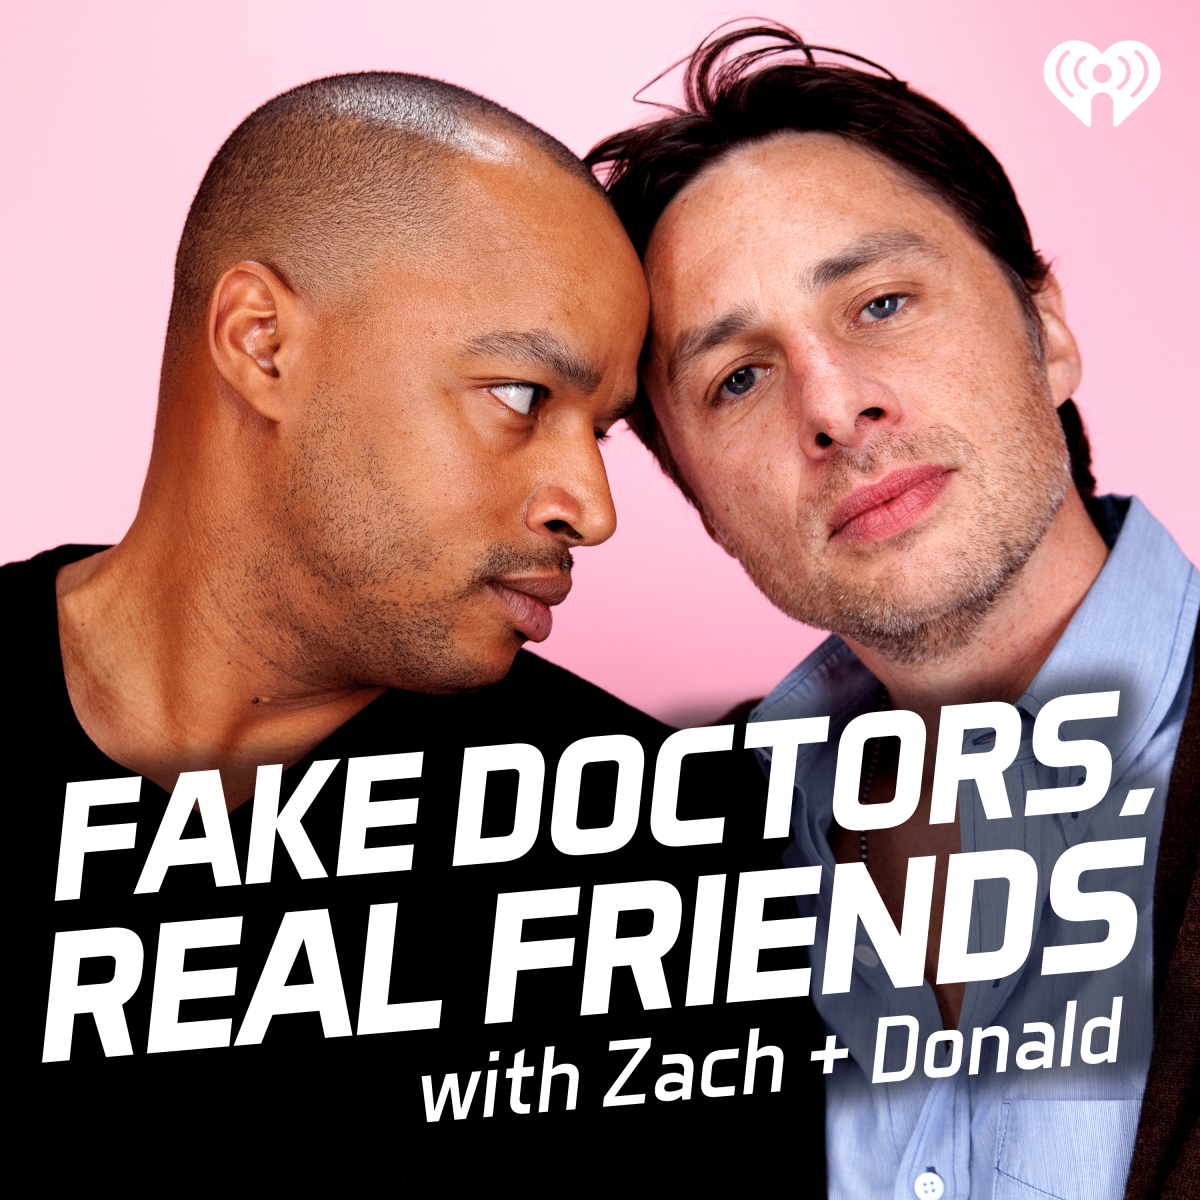 Have you checked out the "Fake Doctors, Real Friends" Podcast hosted by Zach and Donald?